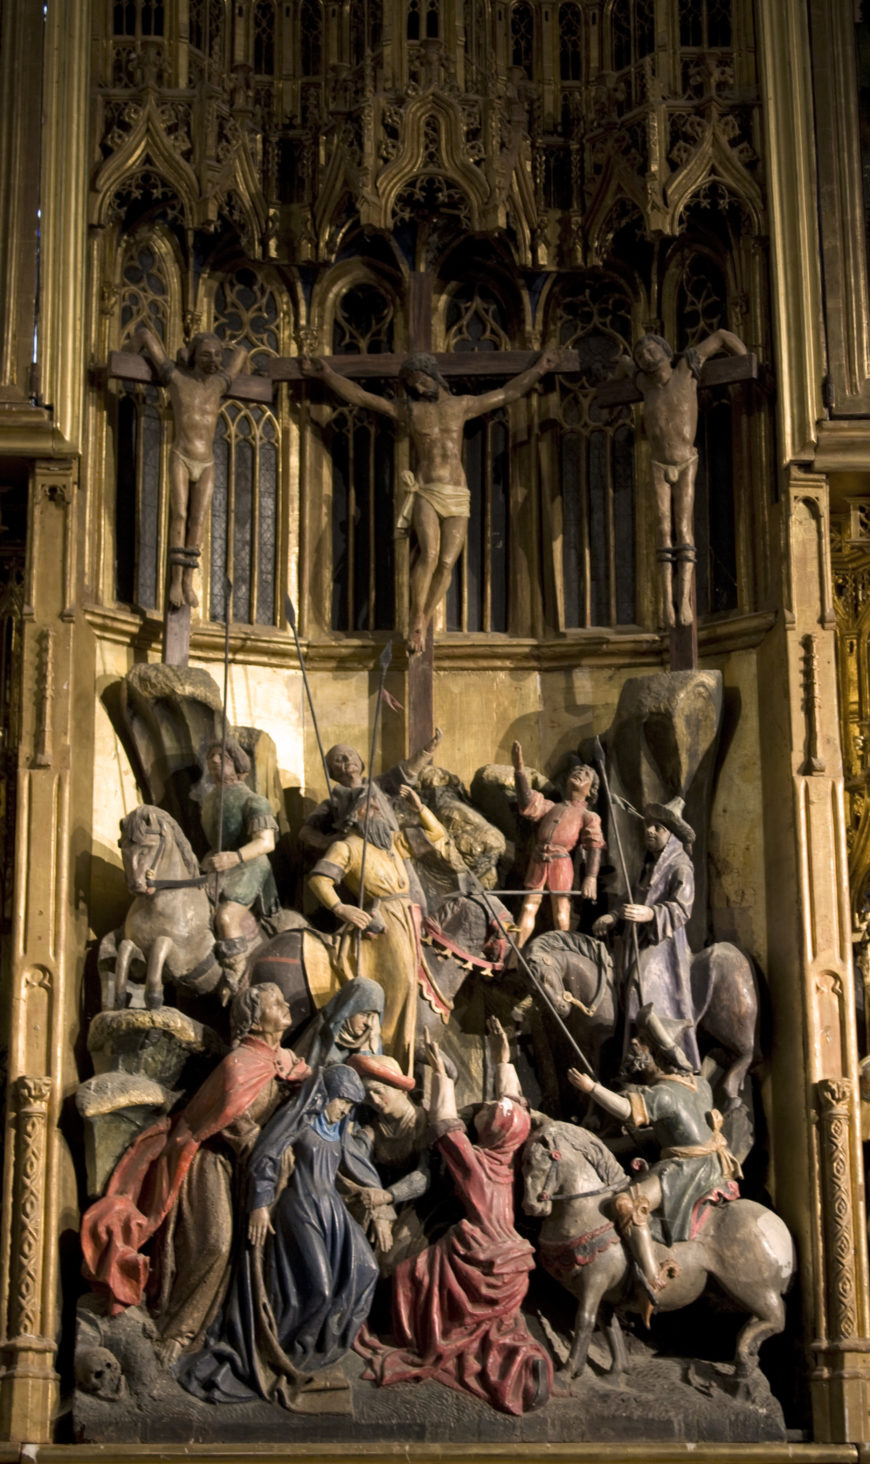 The altarpiece of the Church of St. Martin, detail of the Passion (photo: D Villafruela, CC BY-SA 3.0)